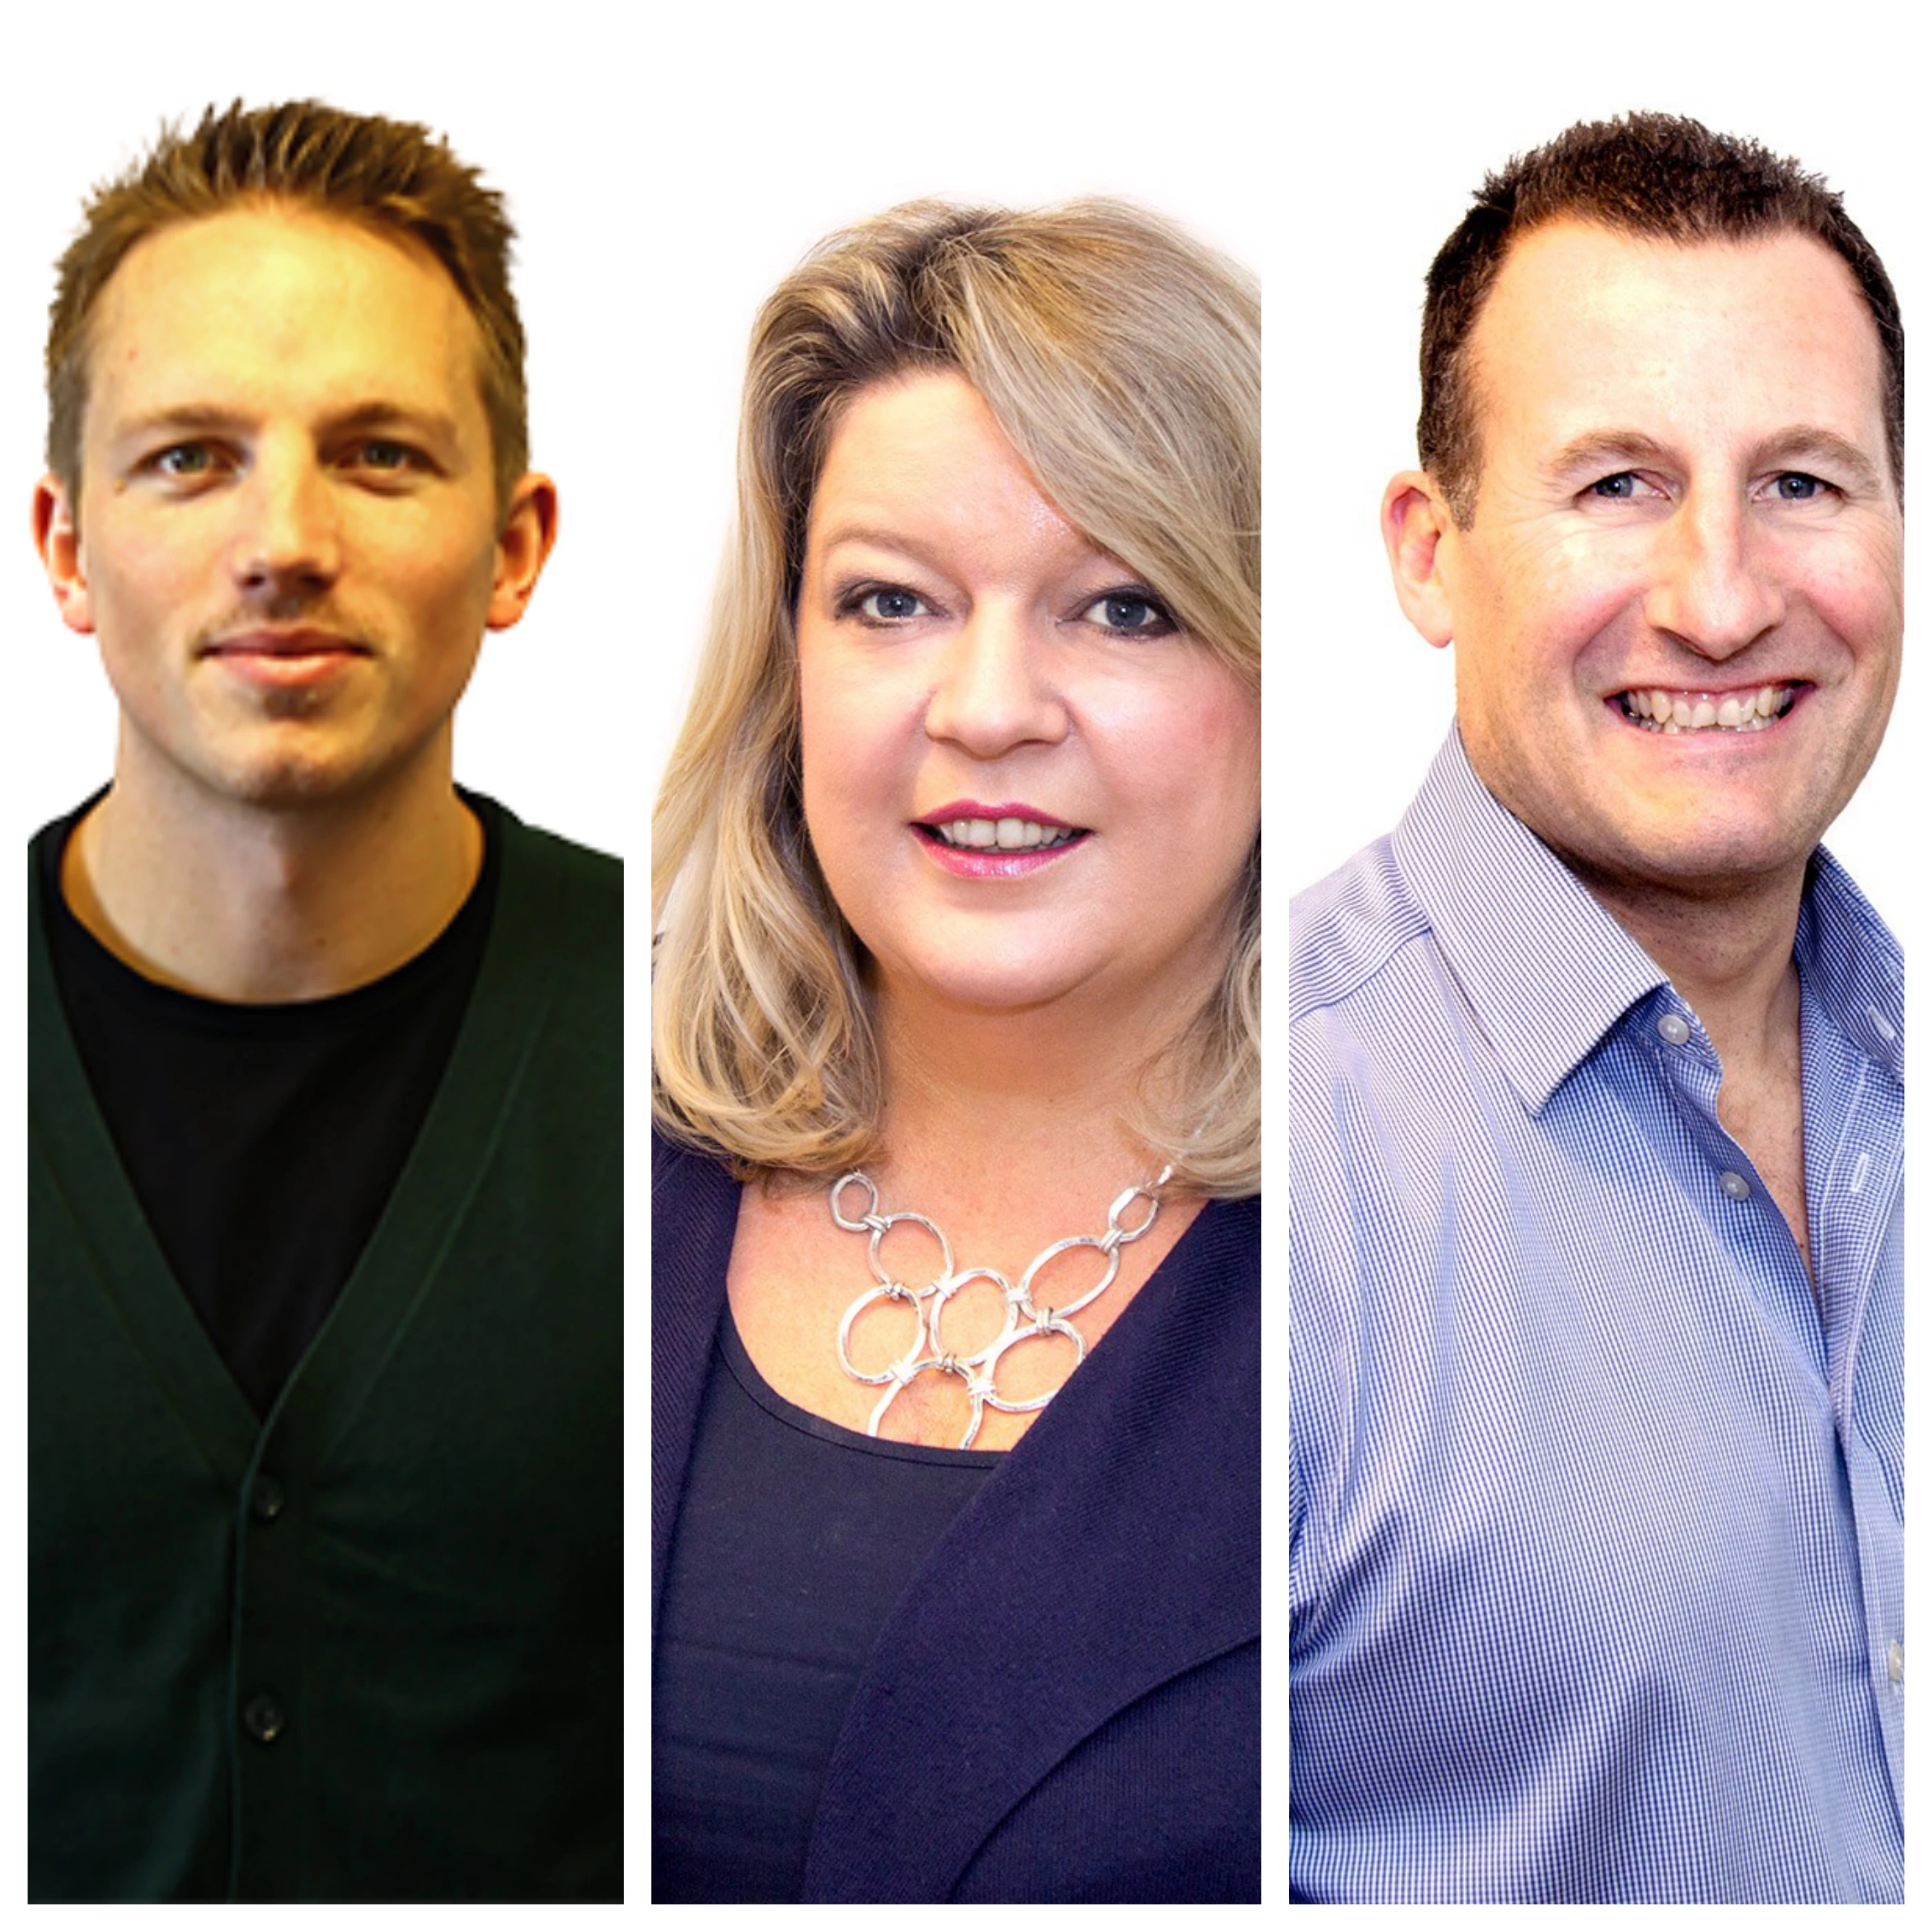 Pictured (LtoR) Chief Operating Officer, Bruce Salamon; Chief Success Officer, Helen Cahill and Chief Commercial Officer, Sean Curtis have all joined the Coniq Senior Leadership Team as part of major expansion